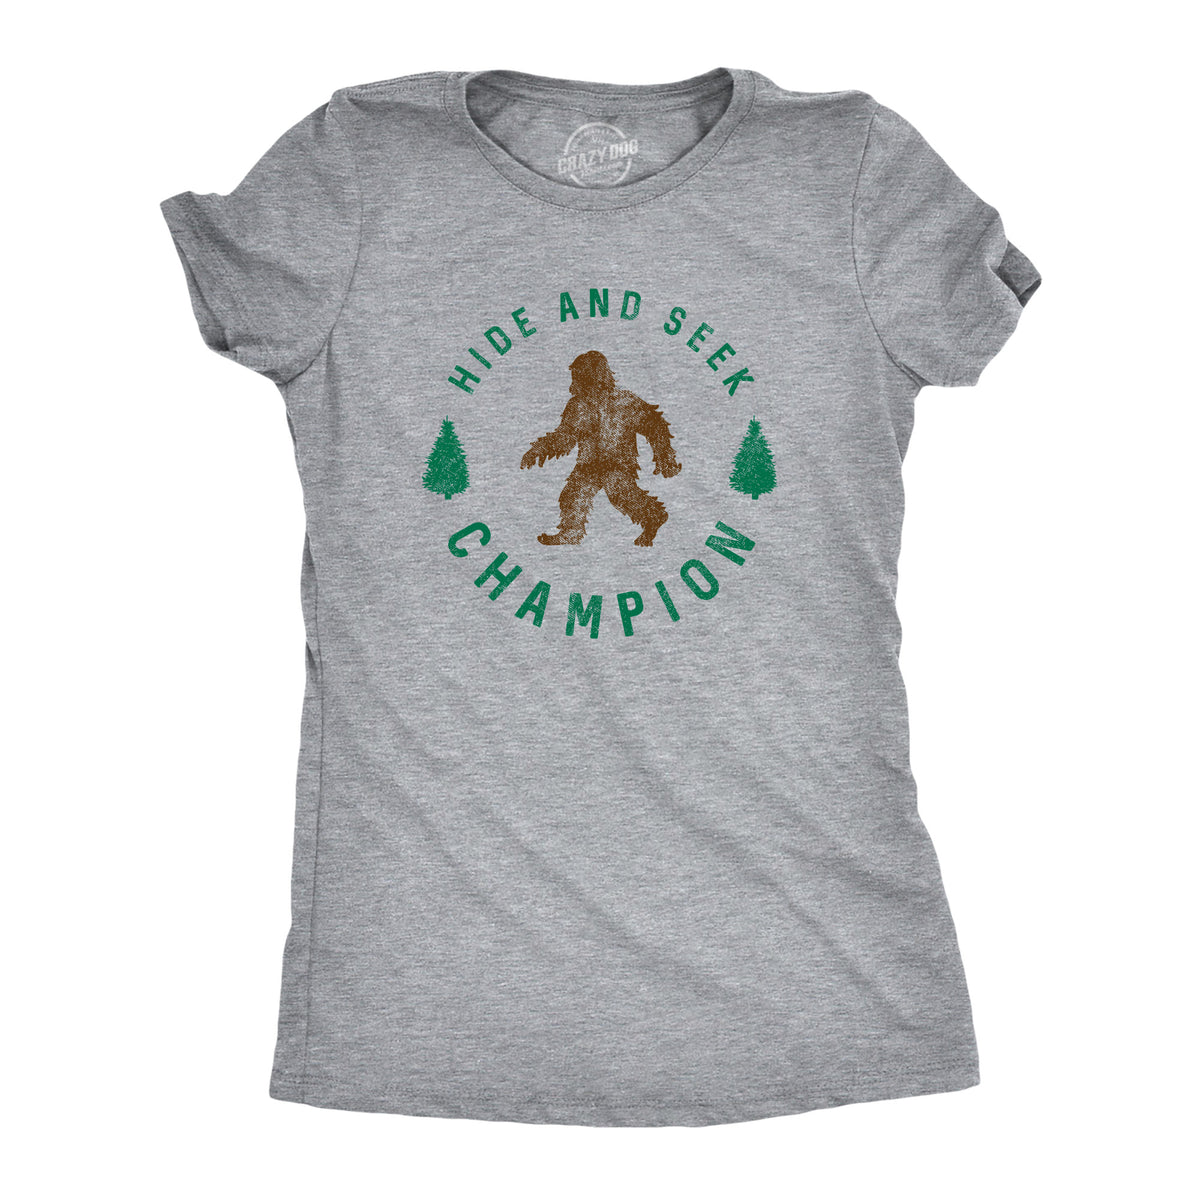 Funny Light Heather Grey Hide And Seek Champion Womens T Shirt Nerdy camping Tee